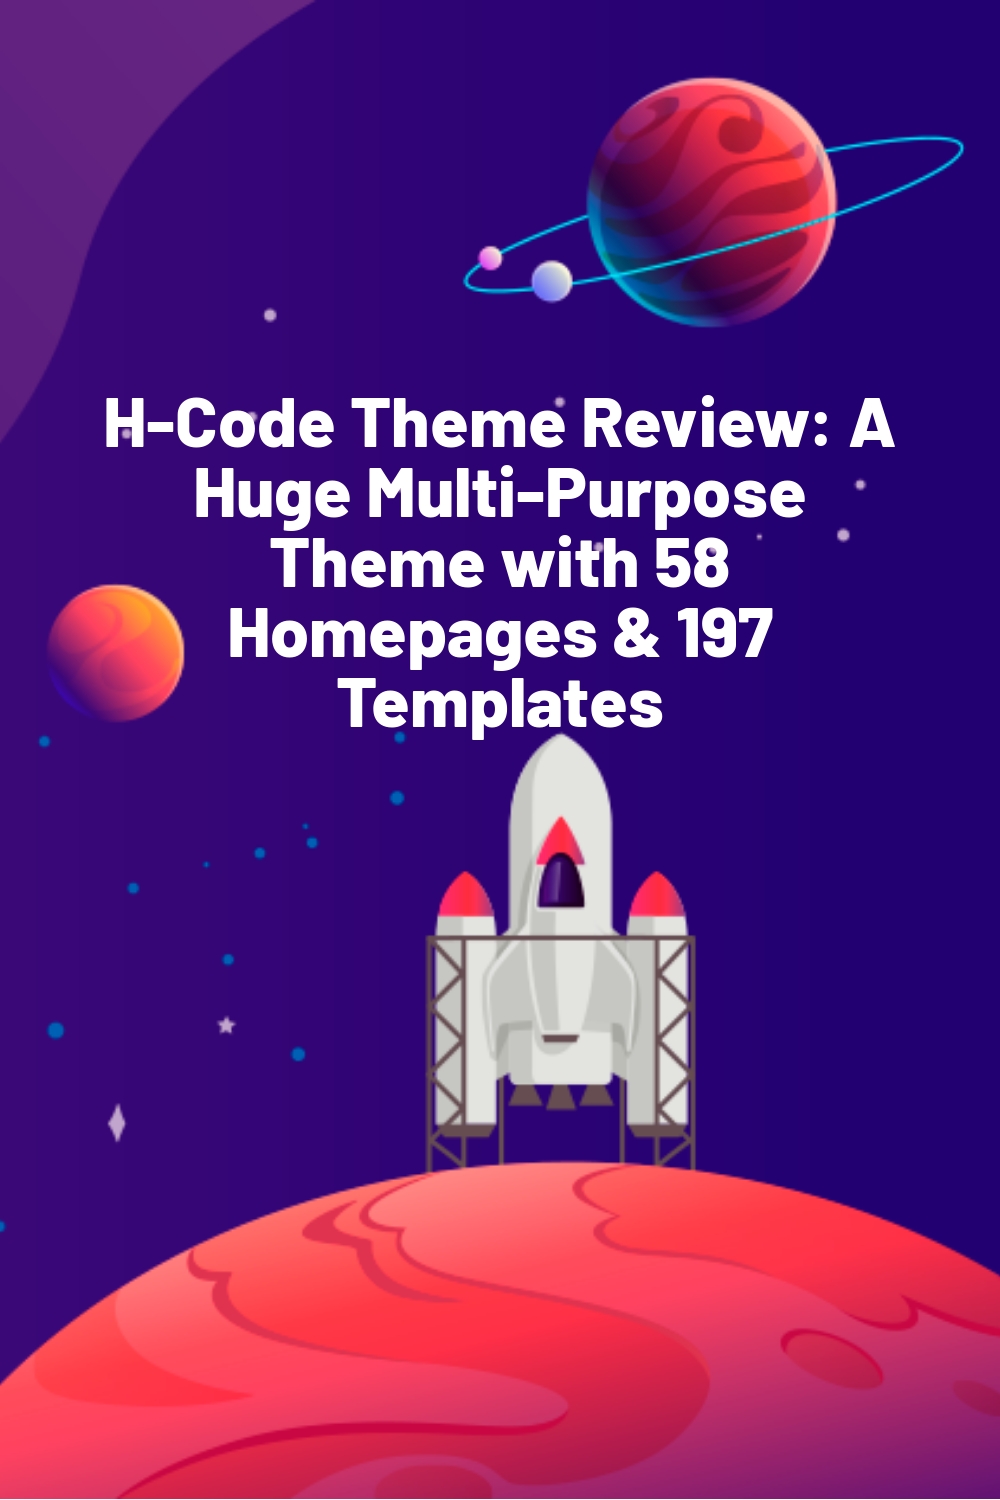 H-Code Theme Review: A Huge Multi-Purpose Theme with 58 Homepages & 197 Templates